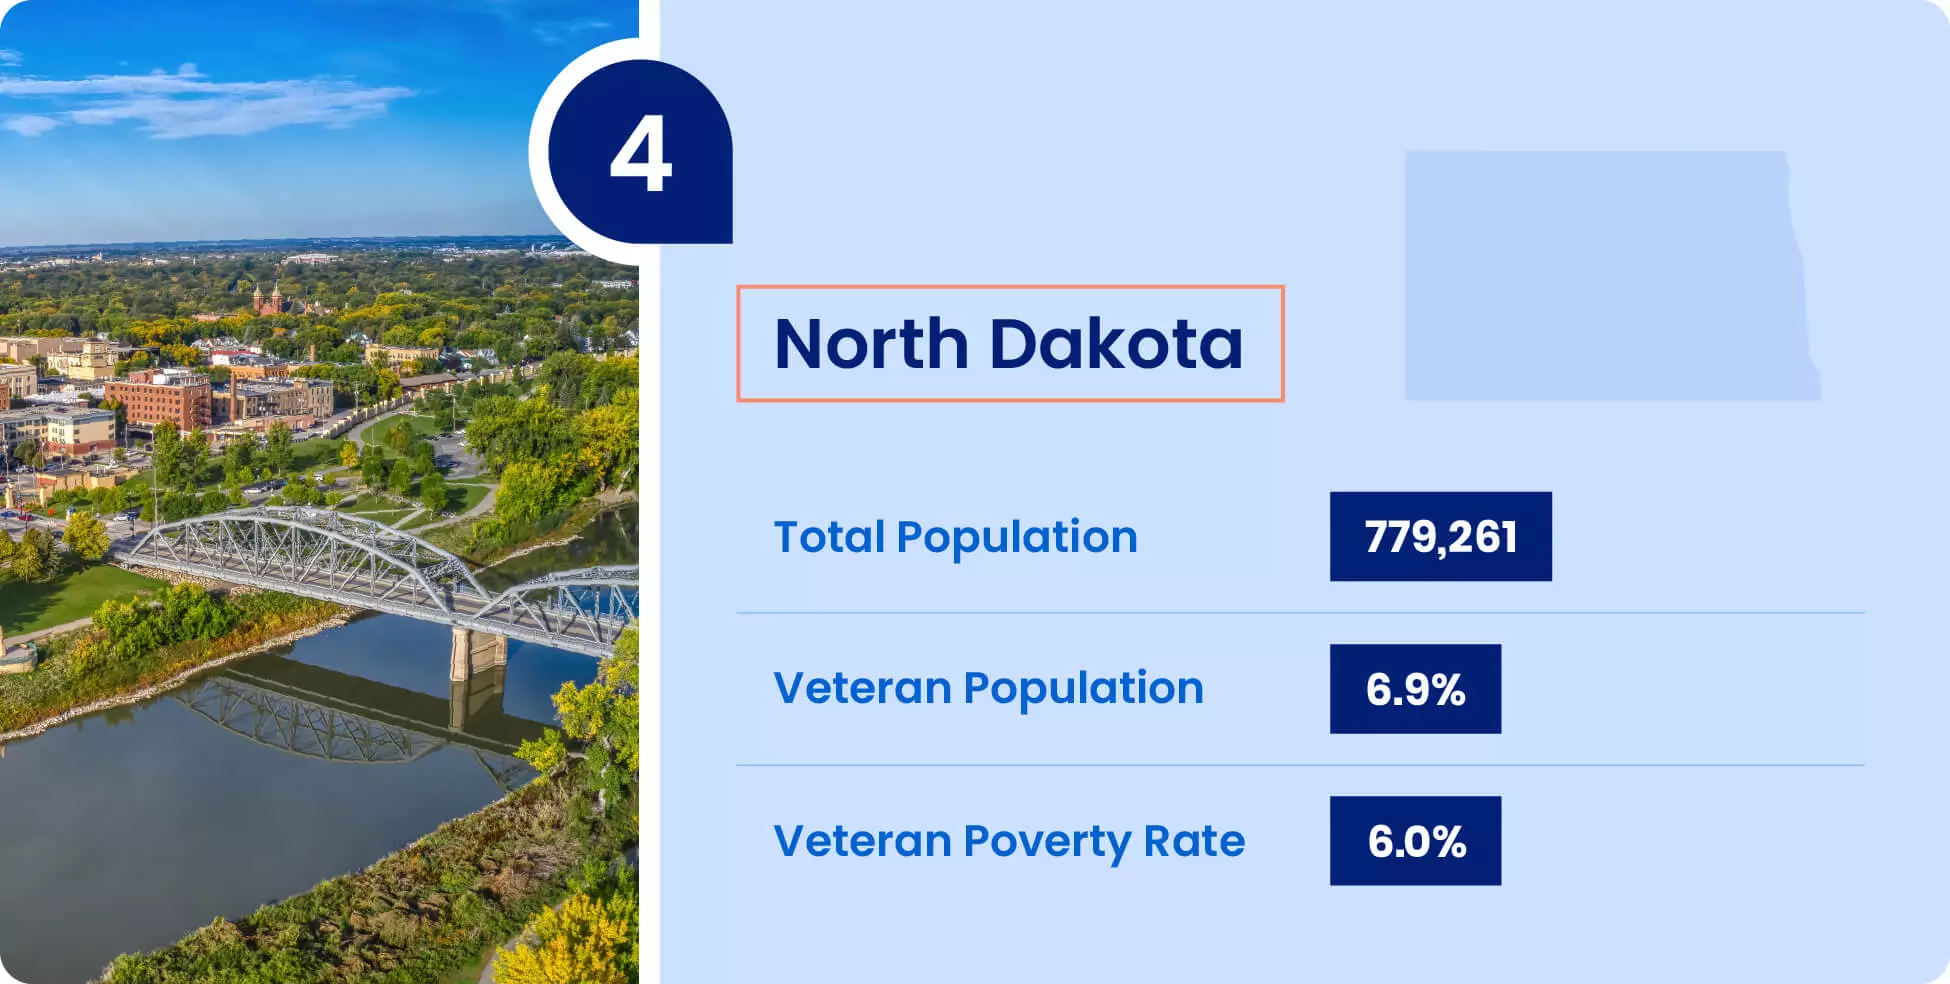 Image shows key information for military retirees thinking of moving to North Dakota.